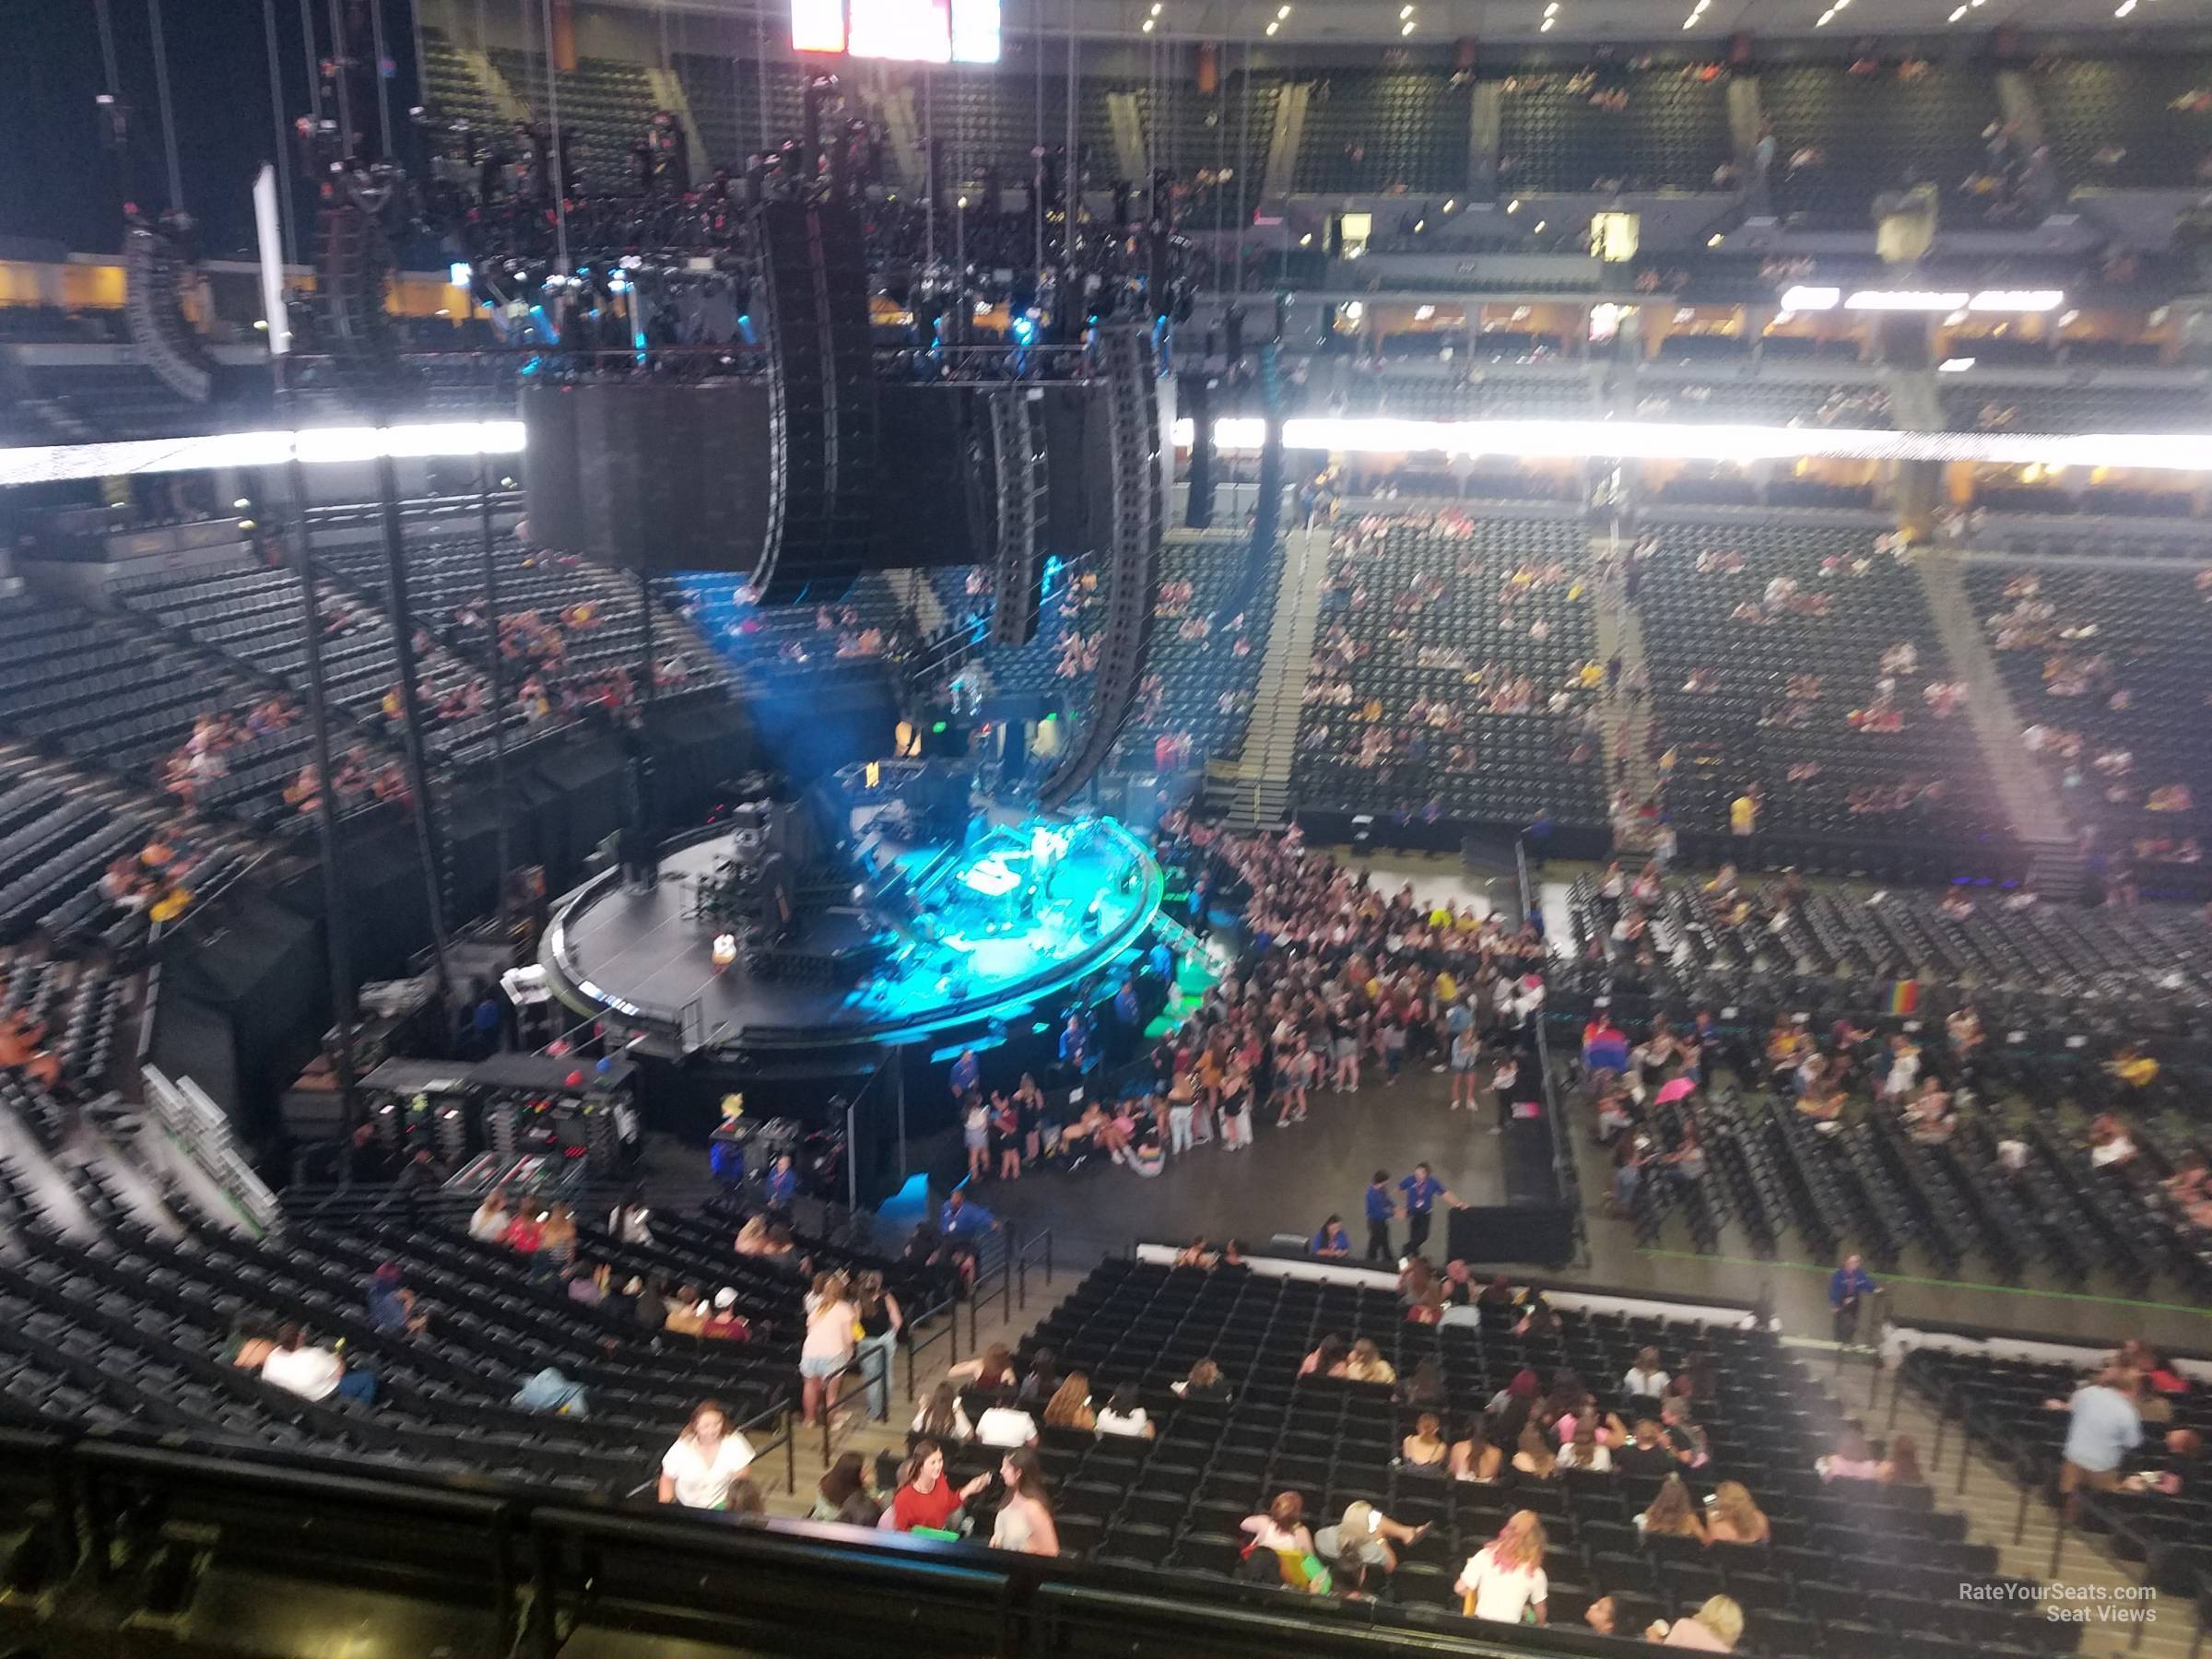 section 234, row 4 seat view  for concert - ball arena